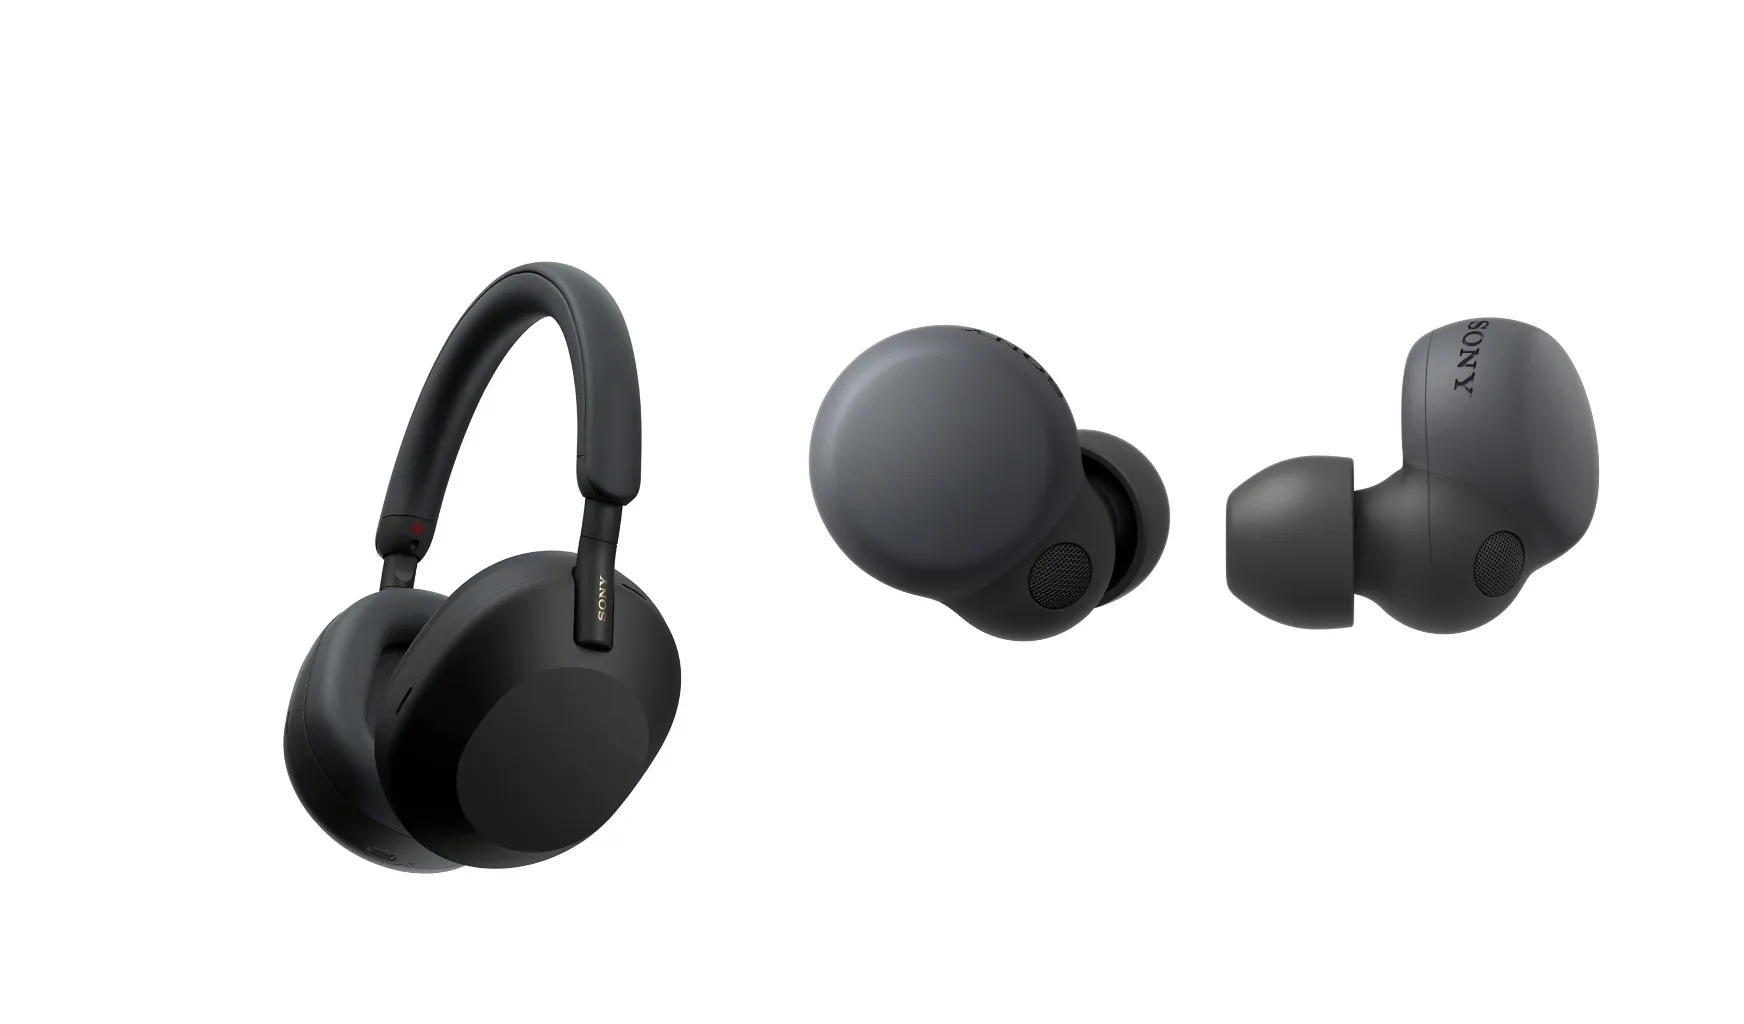 Sony's New Headphones and Speakers Deliver Powerful Bass Experience